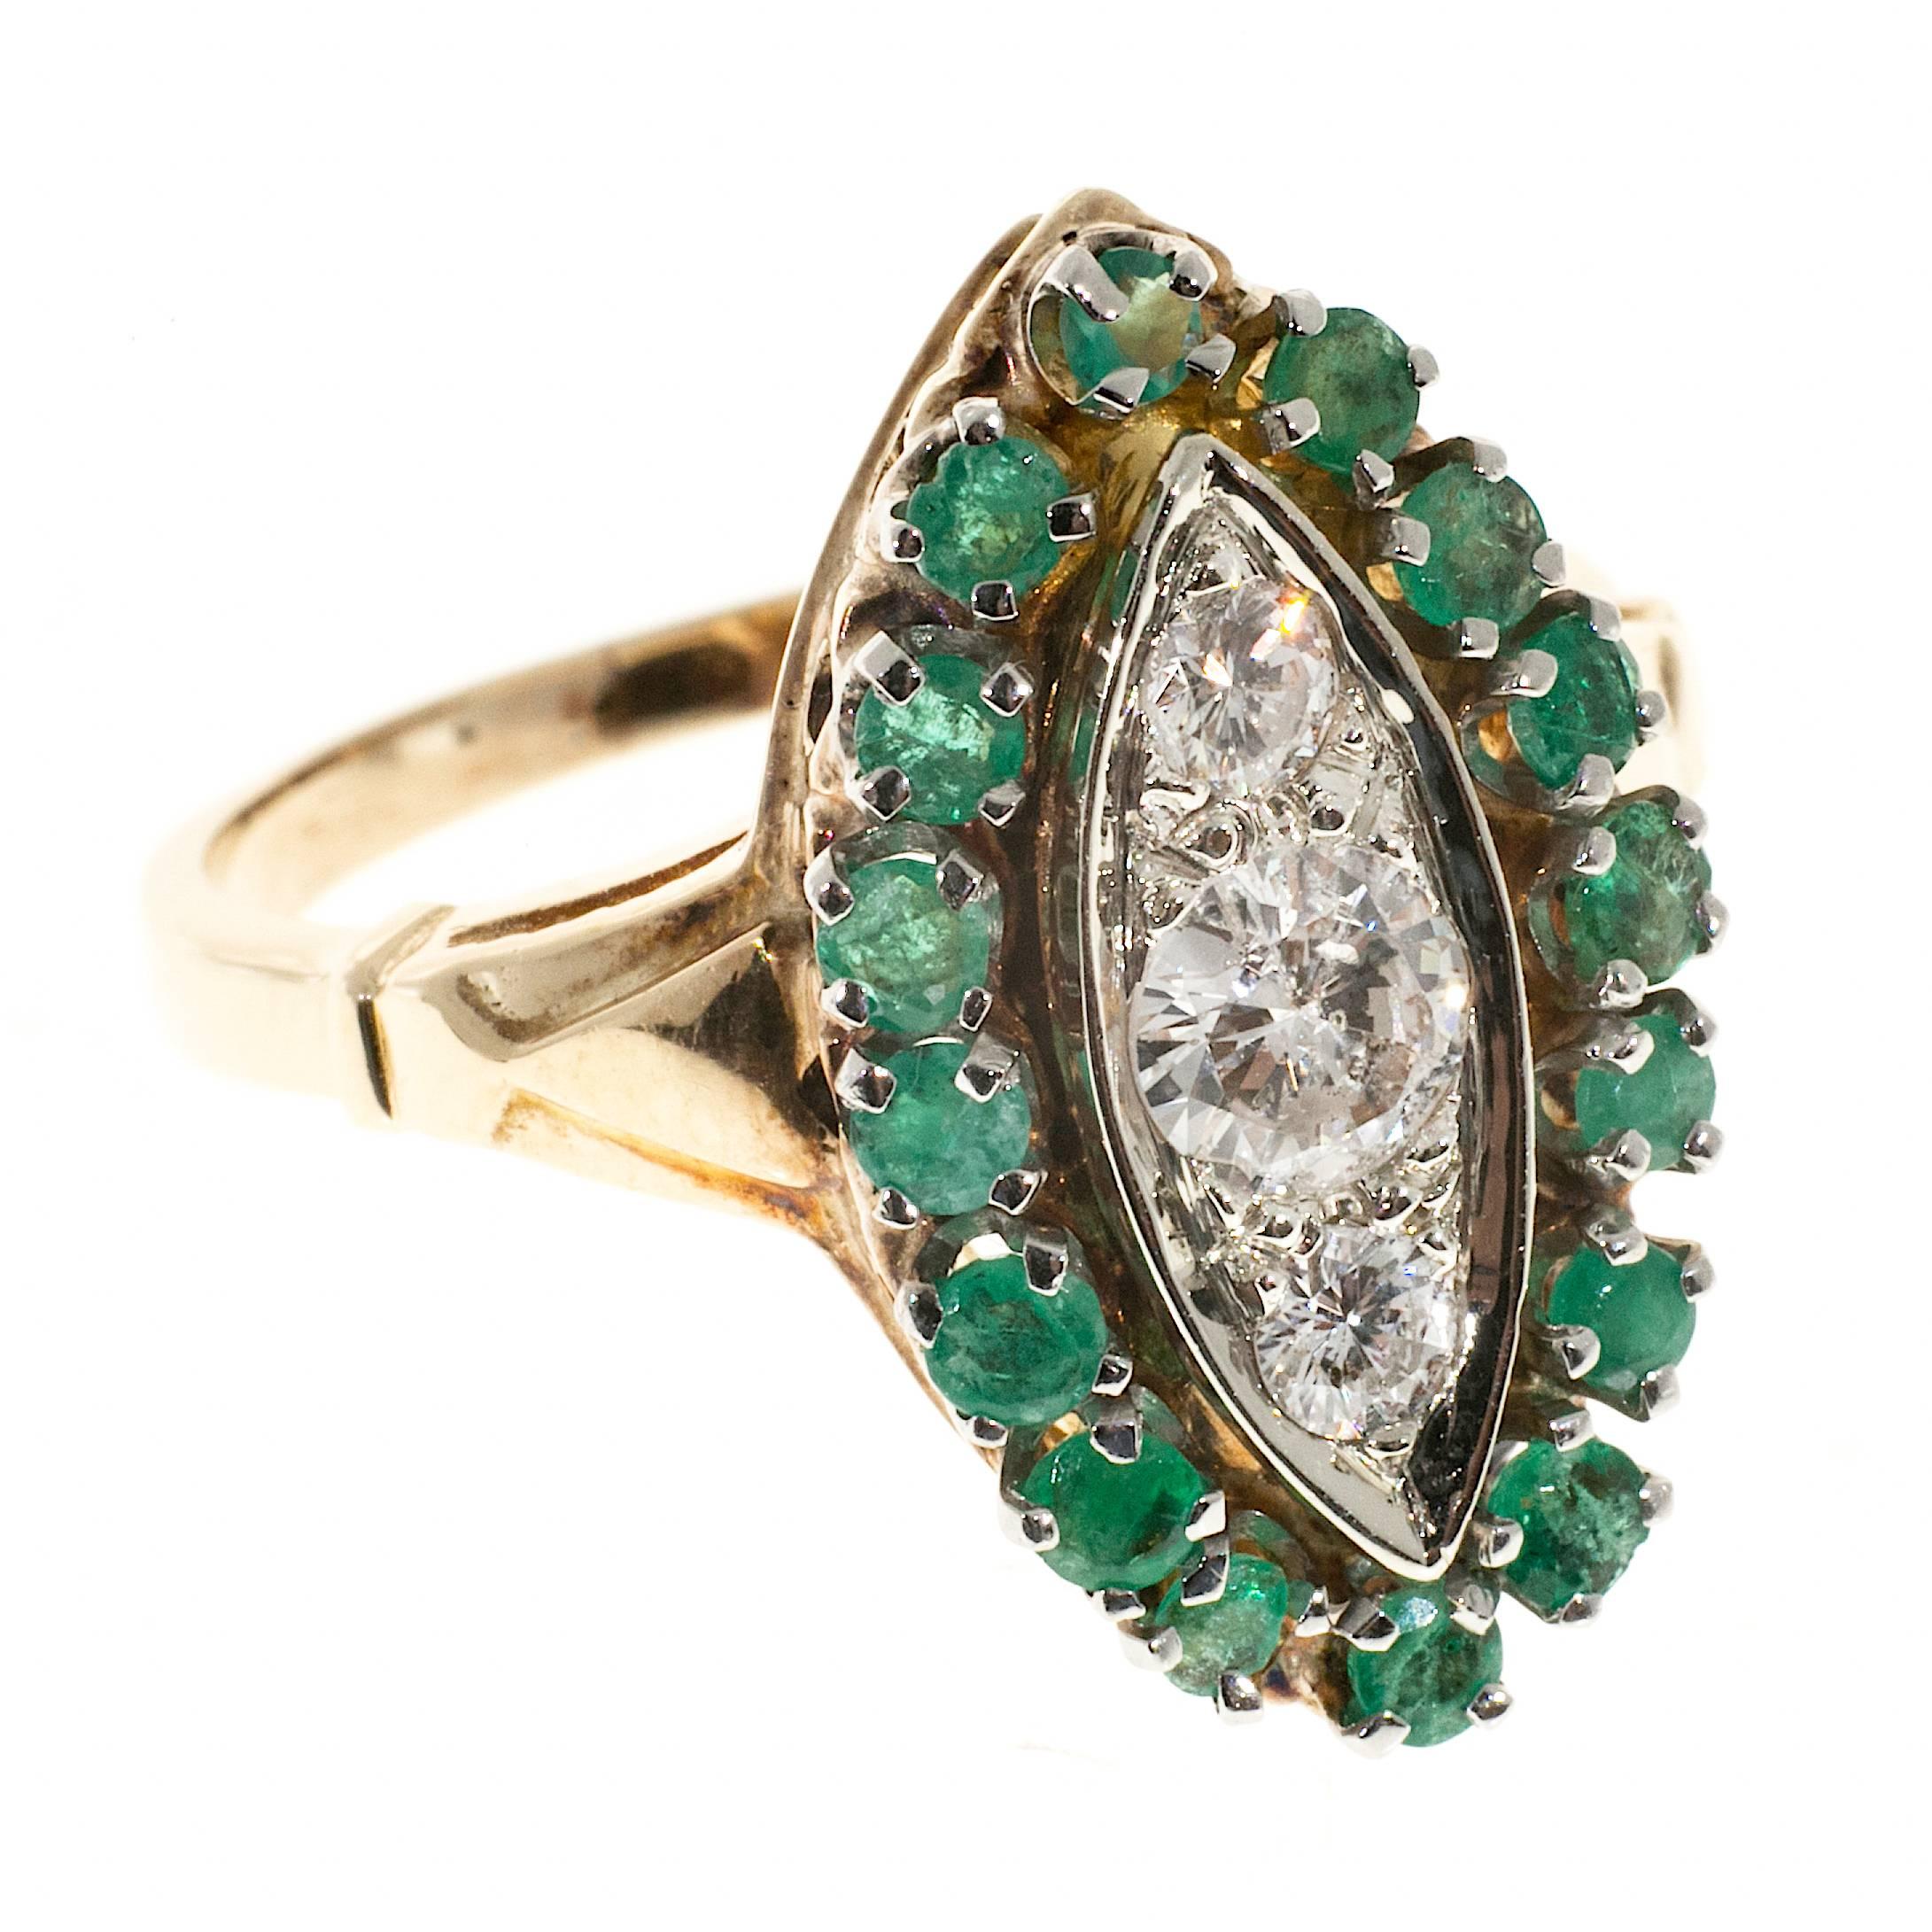 Original 1950’s 14k yellow gold ring with a row of bright medium green emeralds and three bright white diamonds in a white gold section.

3 round diamonds approx. total weight .64cts
Size 8 and sizable
14k Yellow and White Gold
Stamped 14k
7.9 grams
